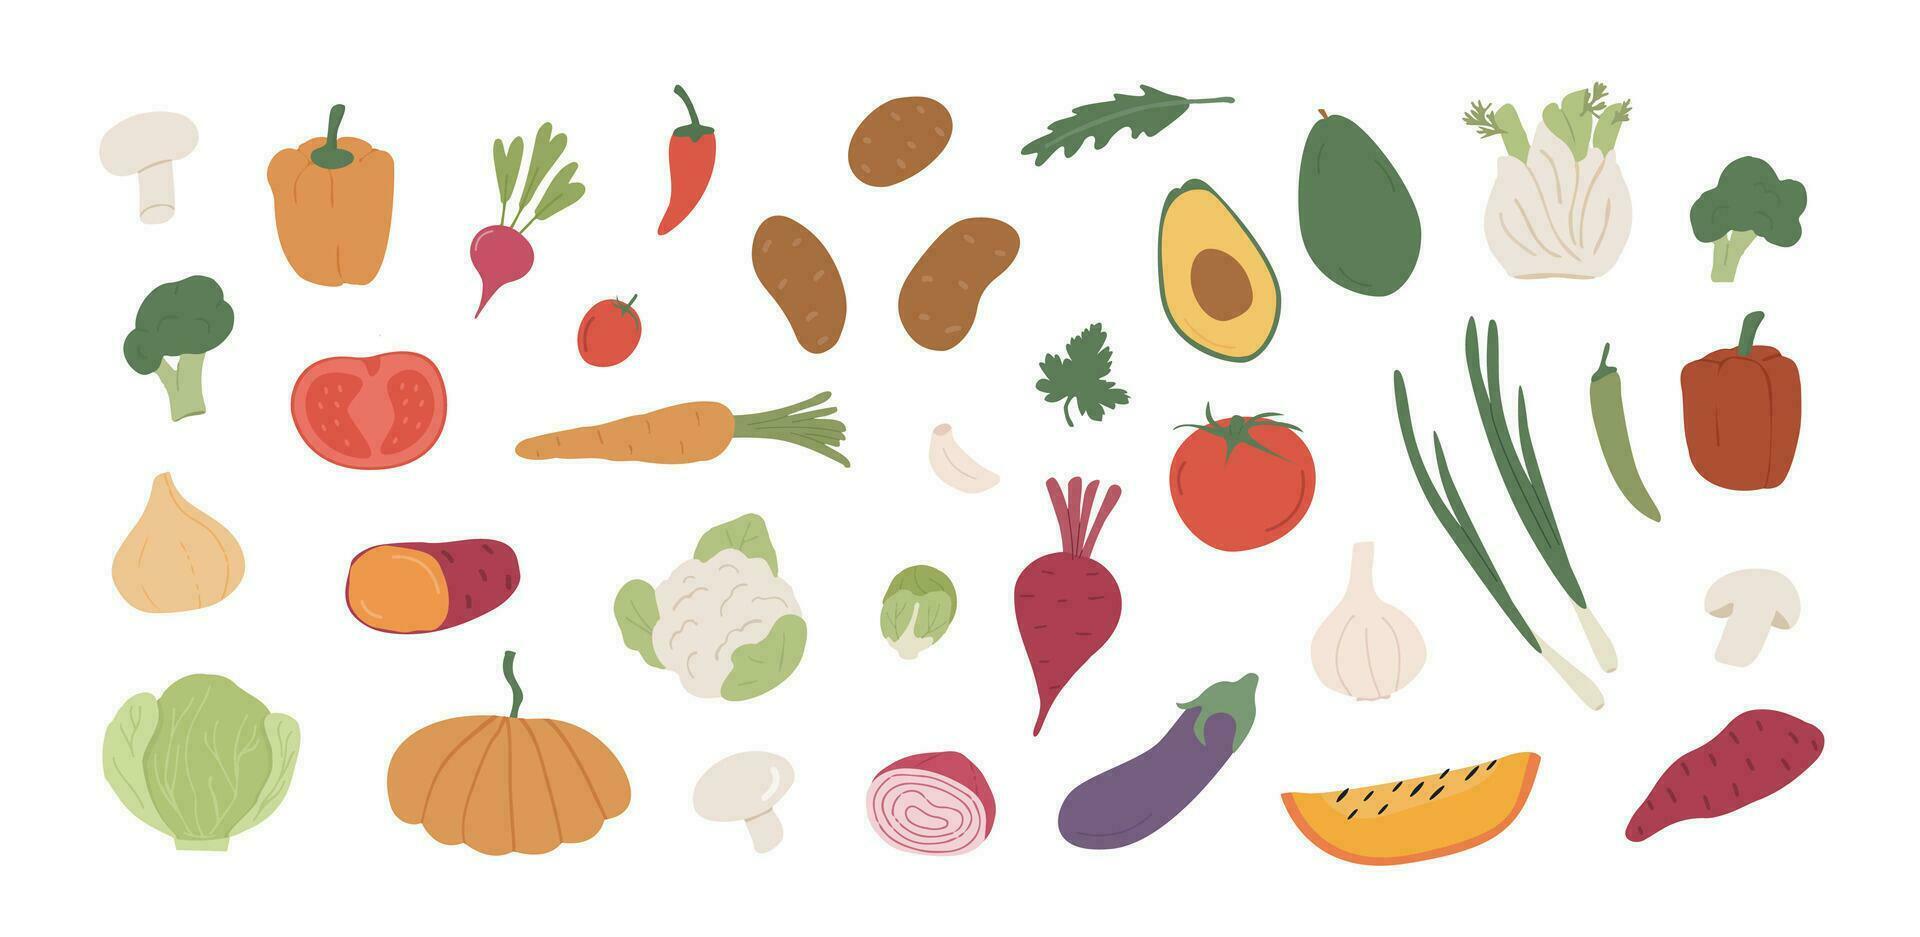 Collection of different vegetables. Bundle of organic natural crops, salads, greens and herbs. Vector illustration in flat cartoon style isolated on white background.